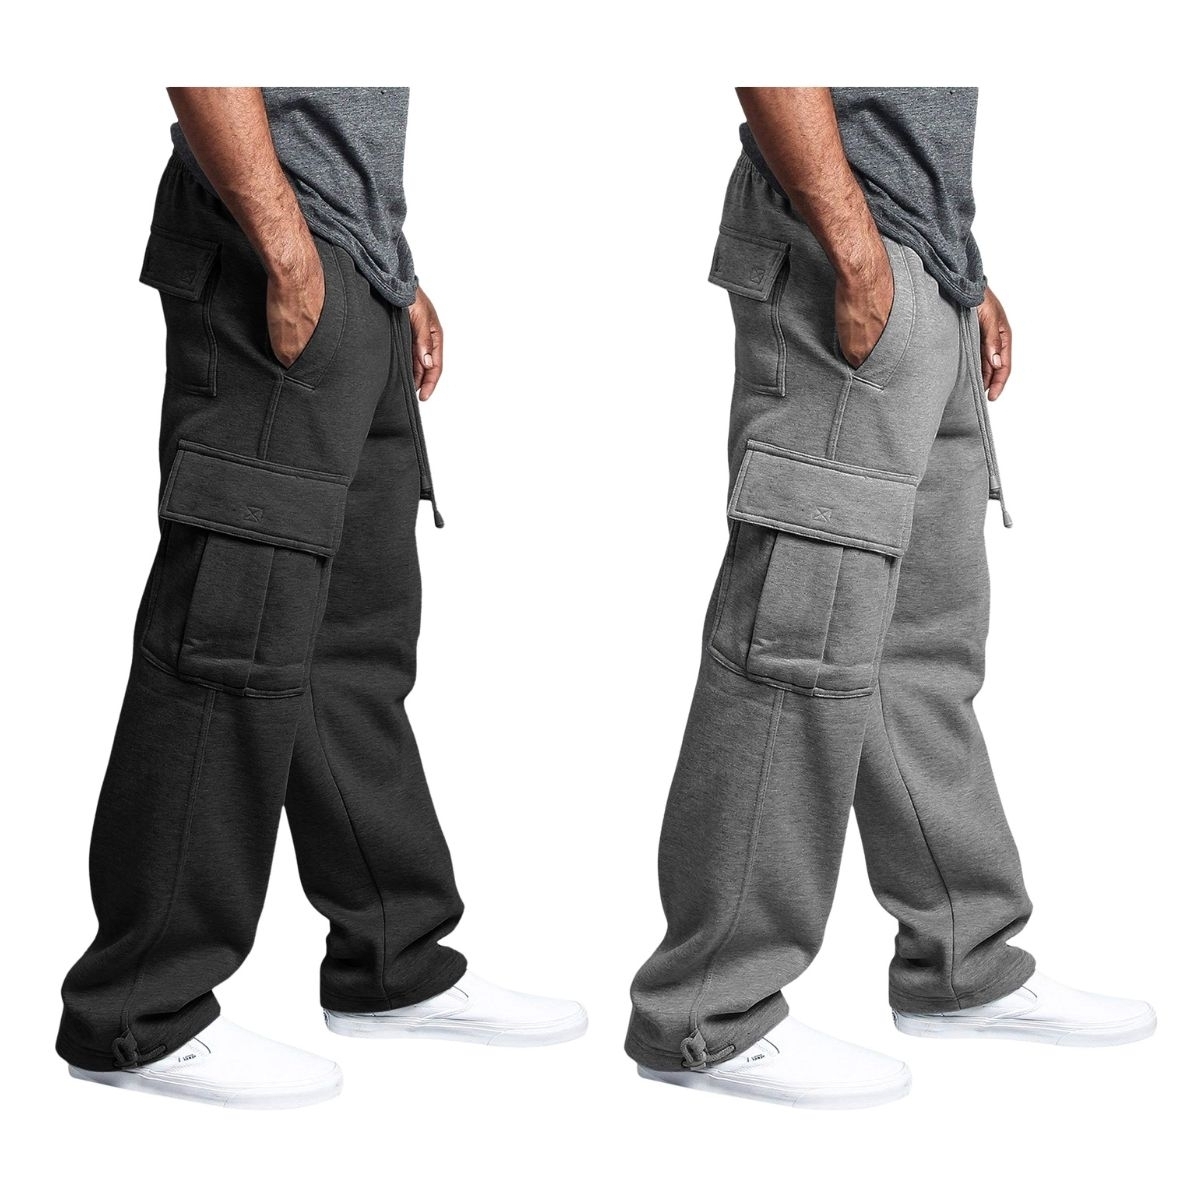 2-Pack: Men's Casual Solid Fleece Lined Cargo Jogger Soft Sweatpants With Pockets - Black&charcoal, Xx-large